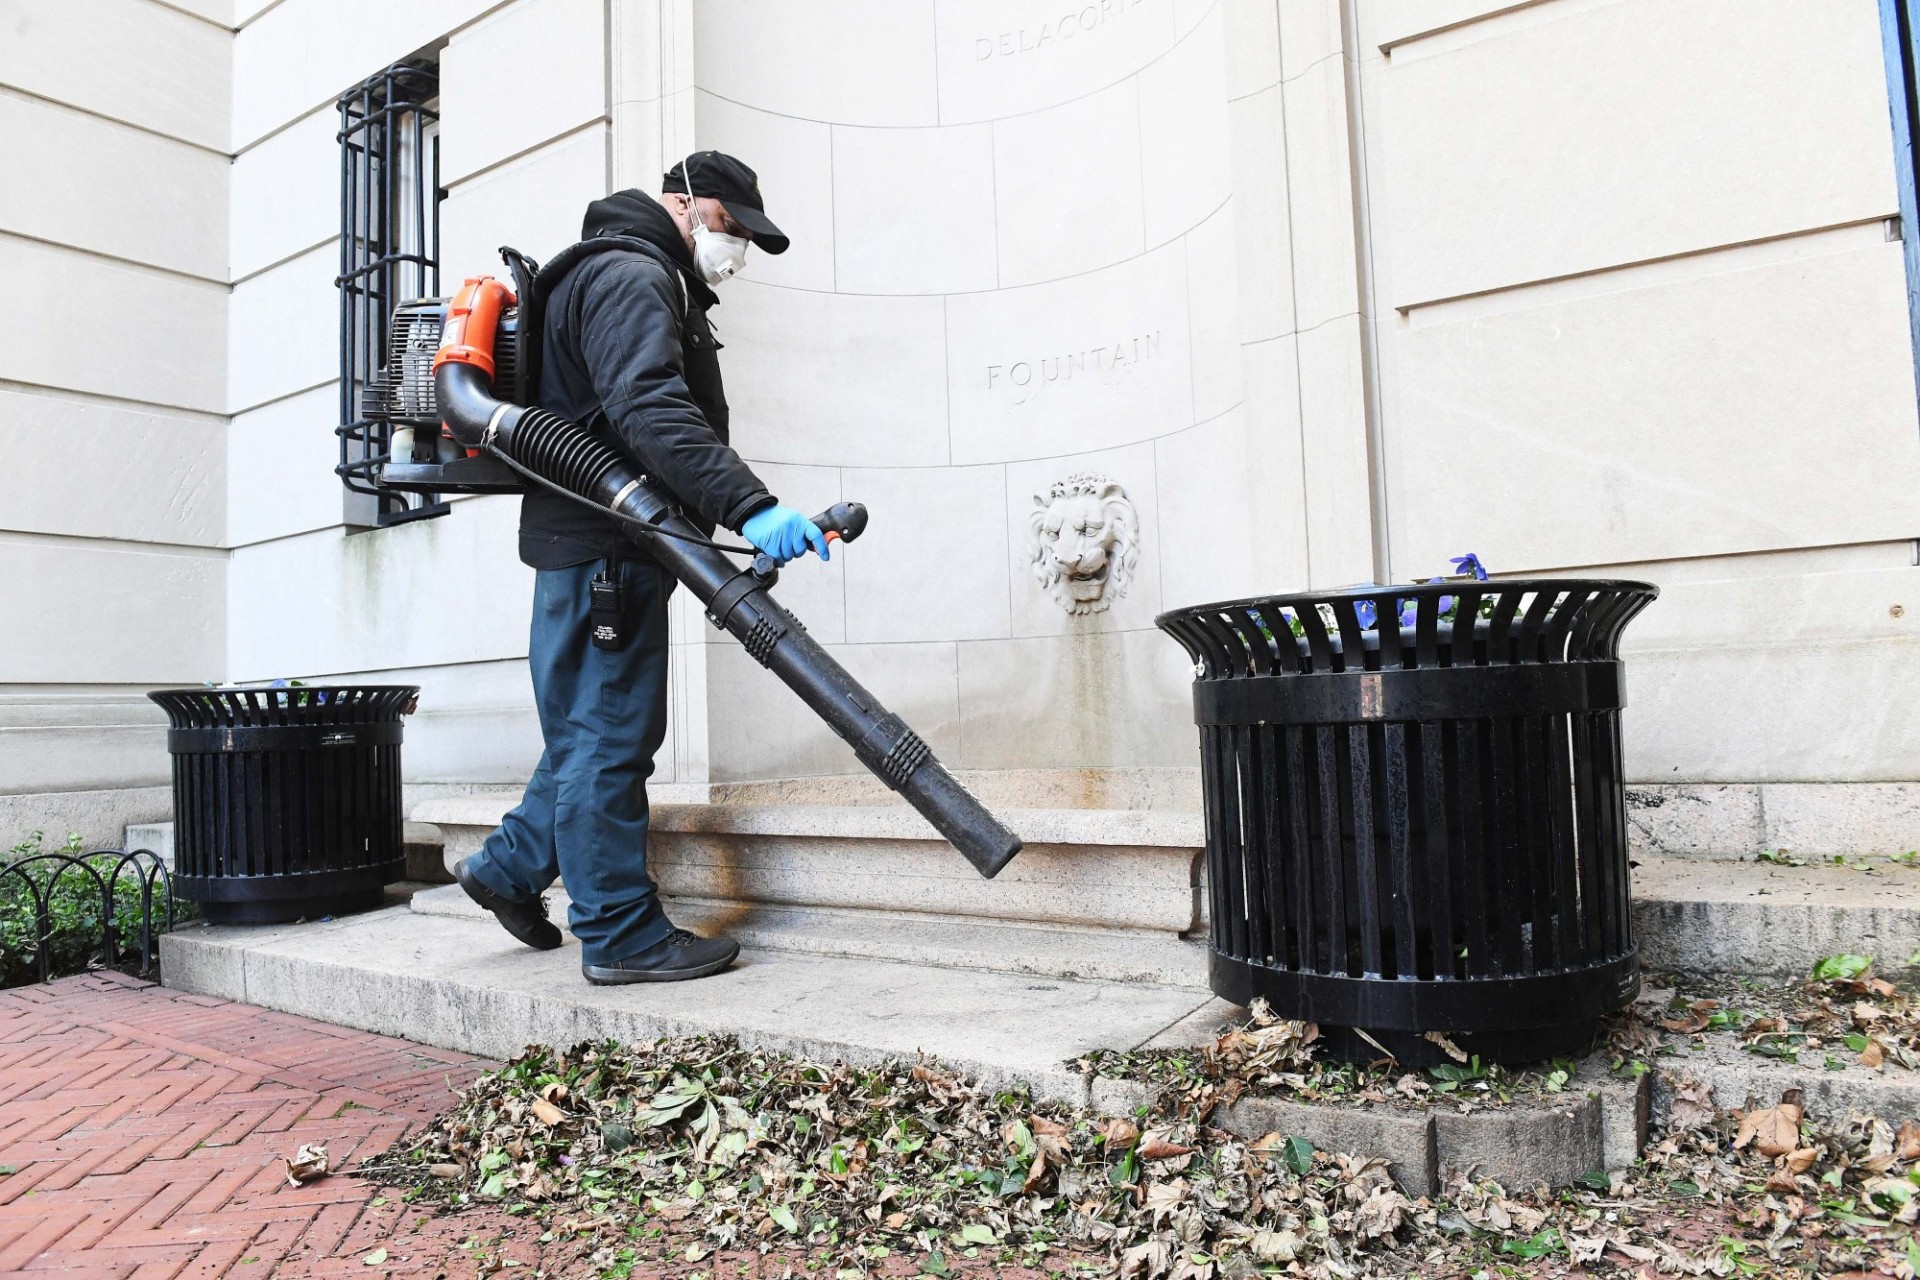 A man wearing a mask, baseball cap, and black jacket is equipped with a leaf blower. He is blowing leaves away from a building.